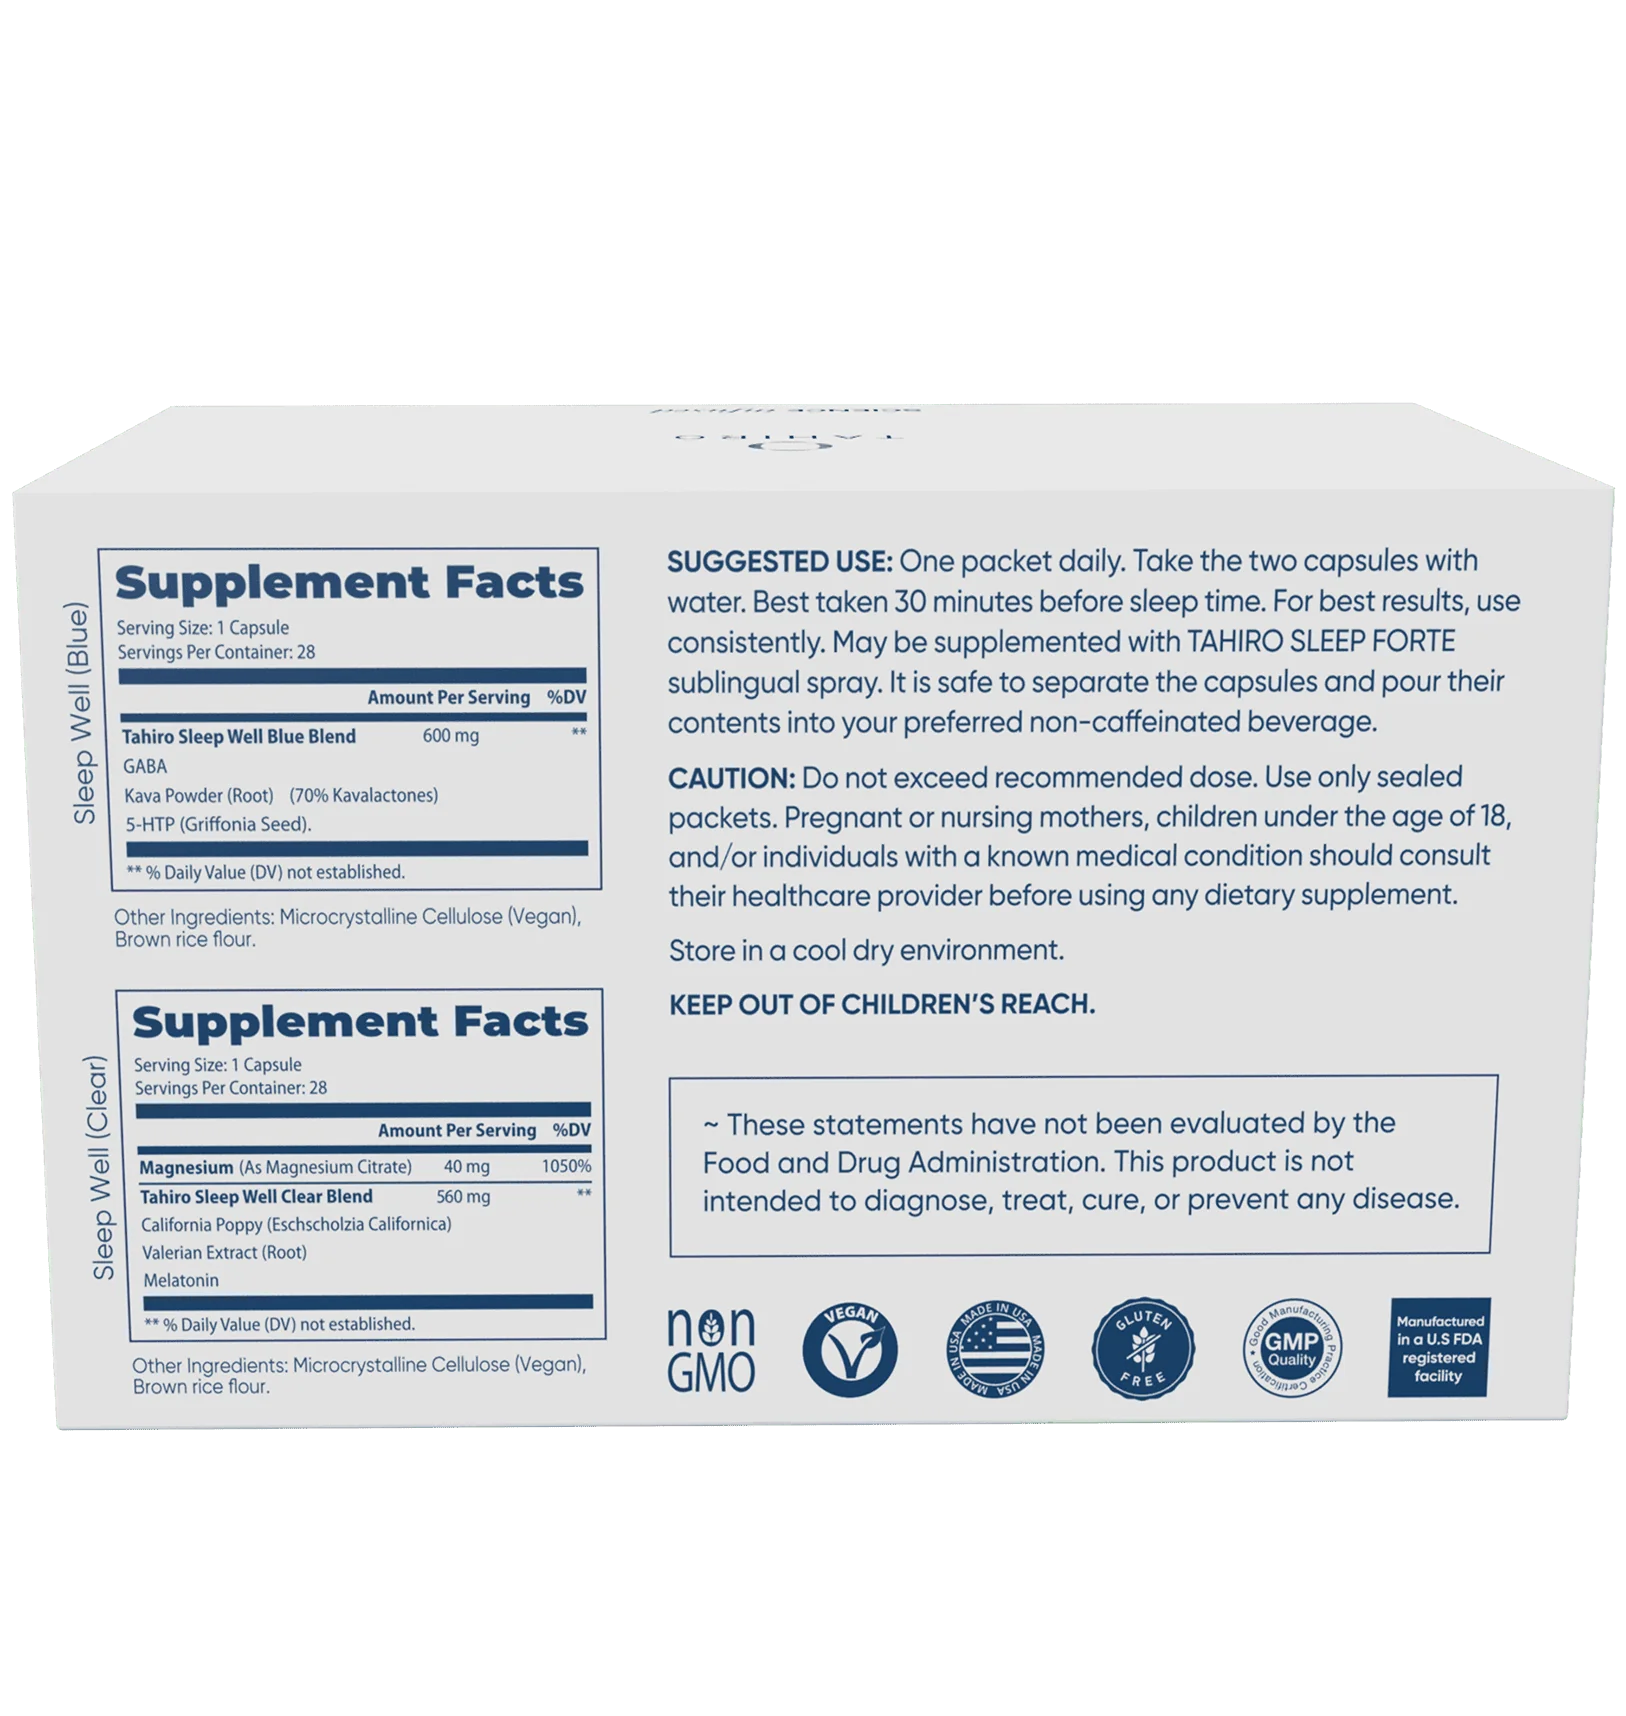 Tahiro sleep well ingredients and supplement facts 